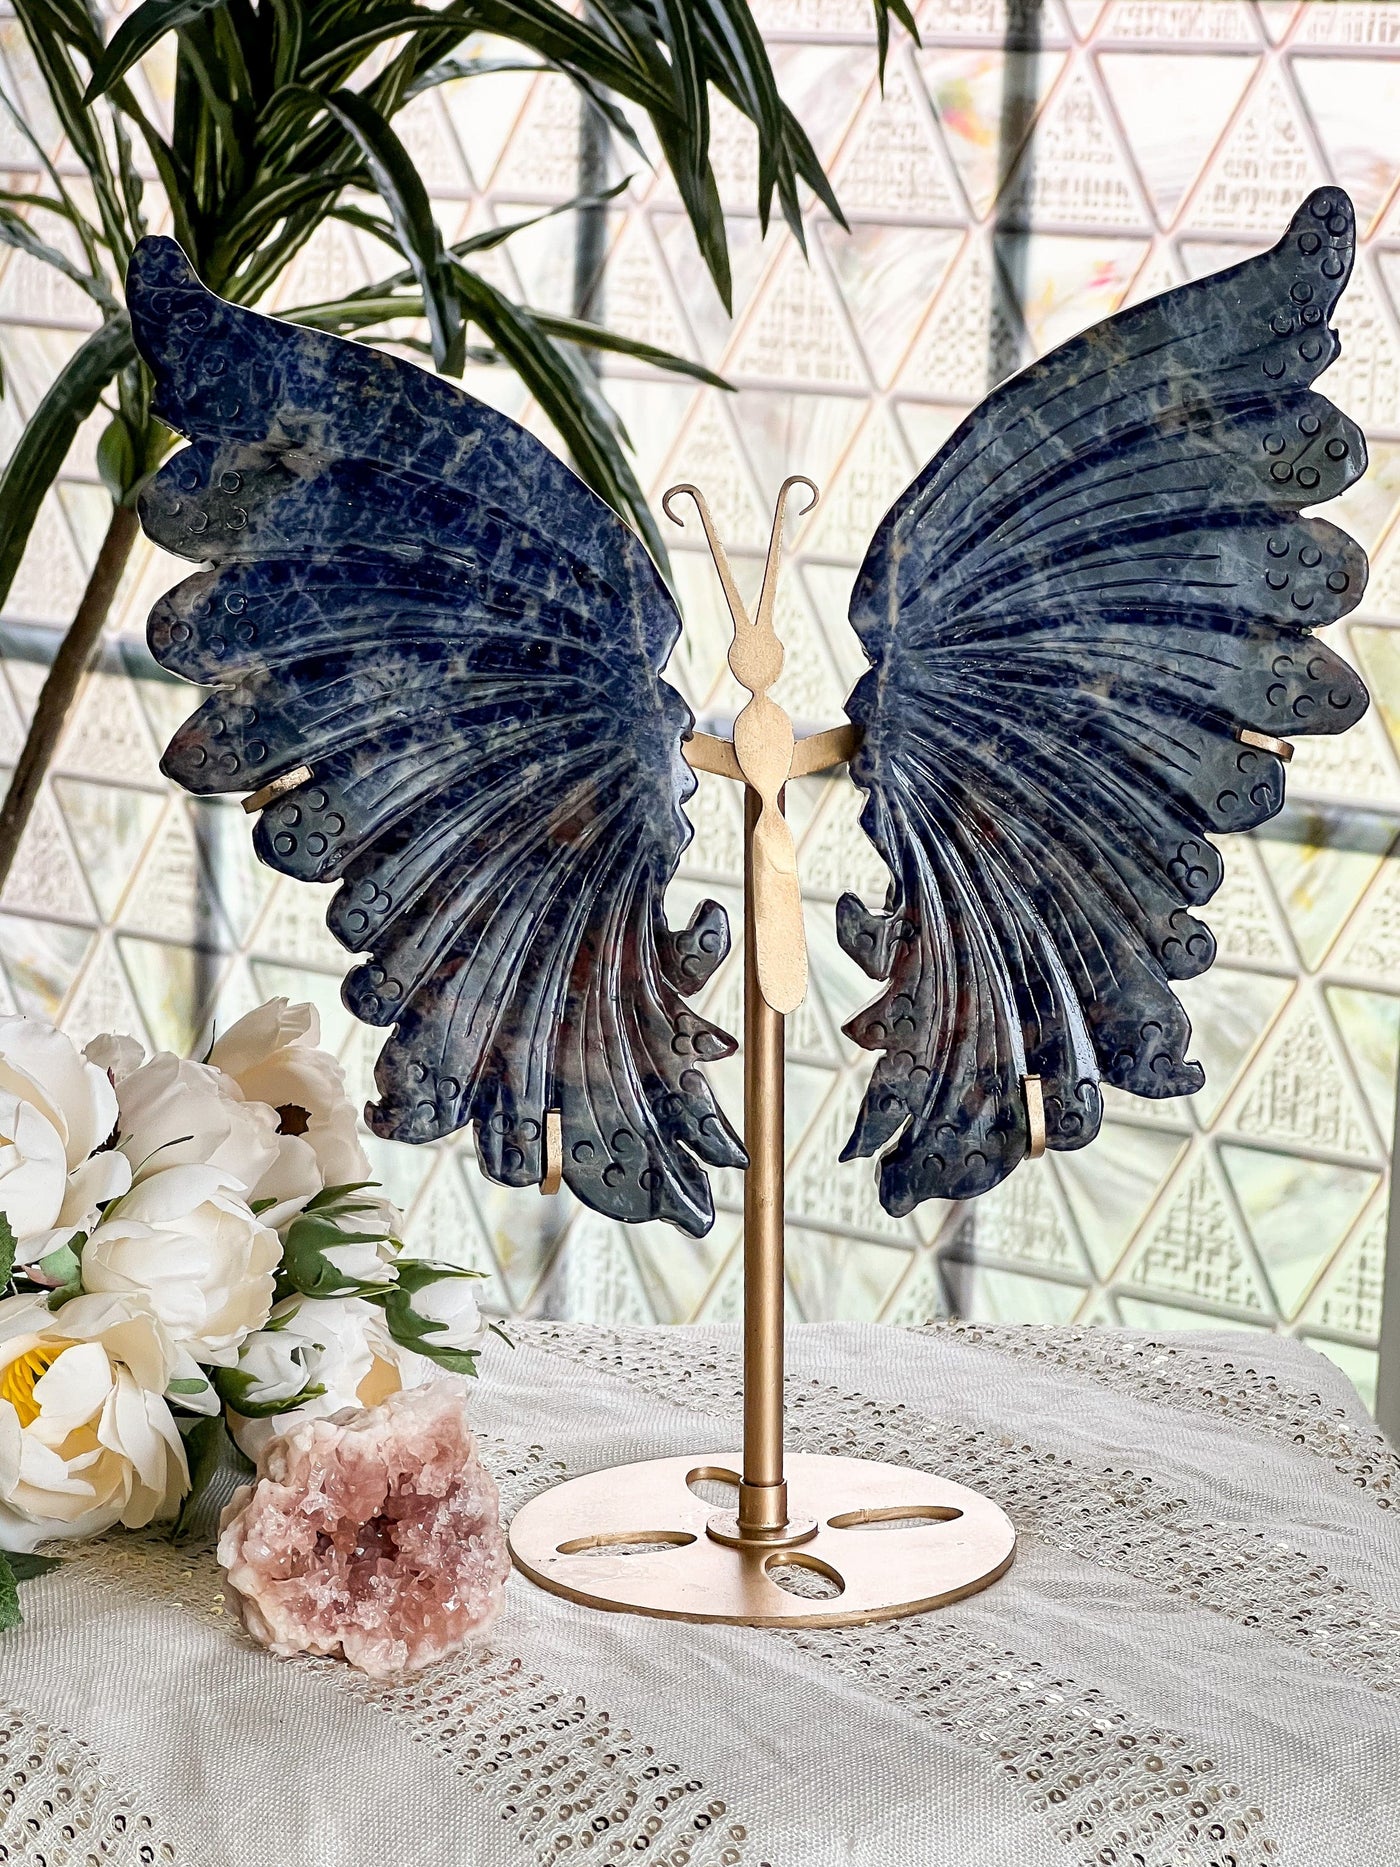 SODALITE  BUTTERFLY WINGS ON STAND (LARGE) Revive In Style Vintage Furniture Painted Refinished Redesign Beautiful One of a Kind Artistic Antique Unique Home Decor Interior Design French Country Shabby Chic Cottage Farmhouse Grandmillenial Coastal Chalk Paint Metallic Glam Eclectic Quality Dovetailed Rustic Furniture Painter Pinterest Bedroom Living Room Entryway Kitchen Home Trends House Styles Decorating ideas